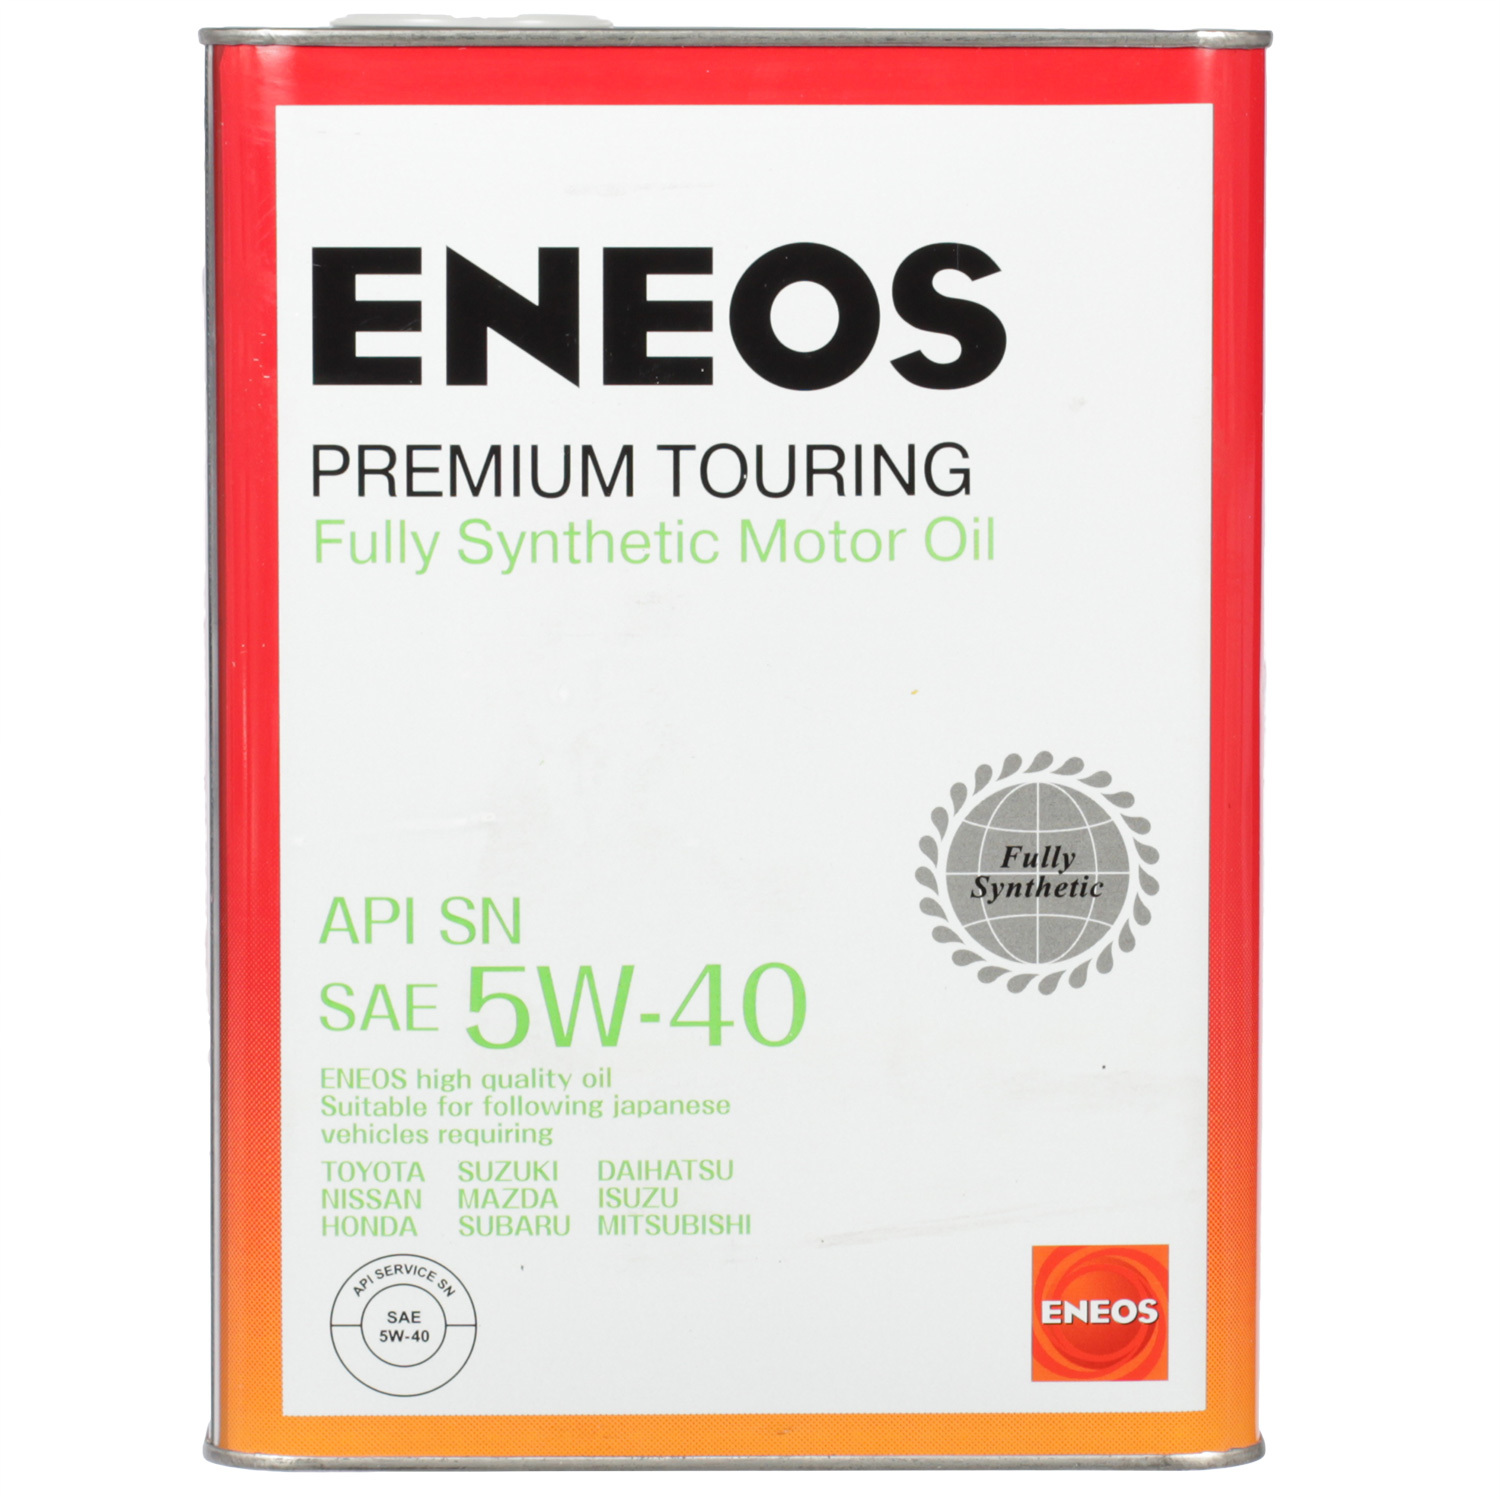 Eneos Моторное масло Eneos Premium TOURING SN 5W-40, 4 л масло моторное totachi grand touring sn cf 5w 40 синтетическое 60 л